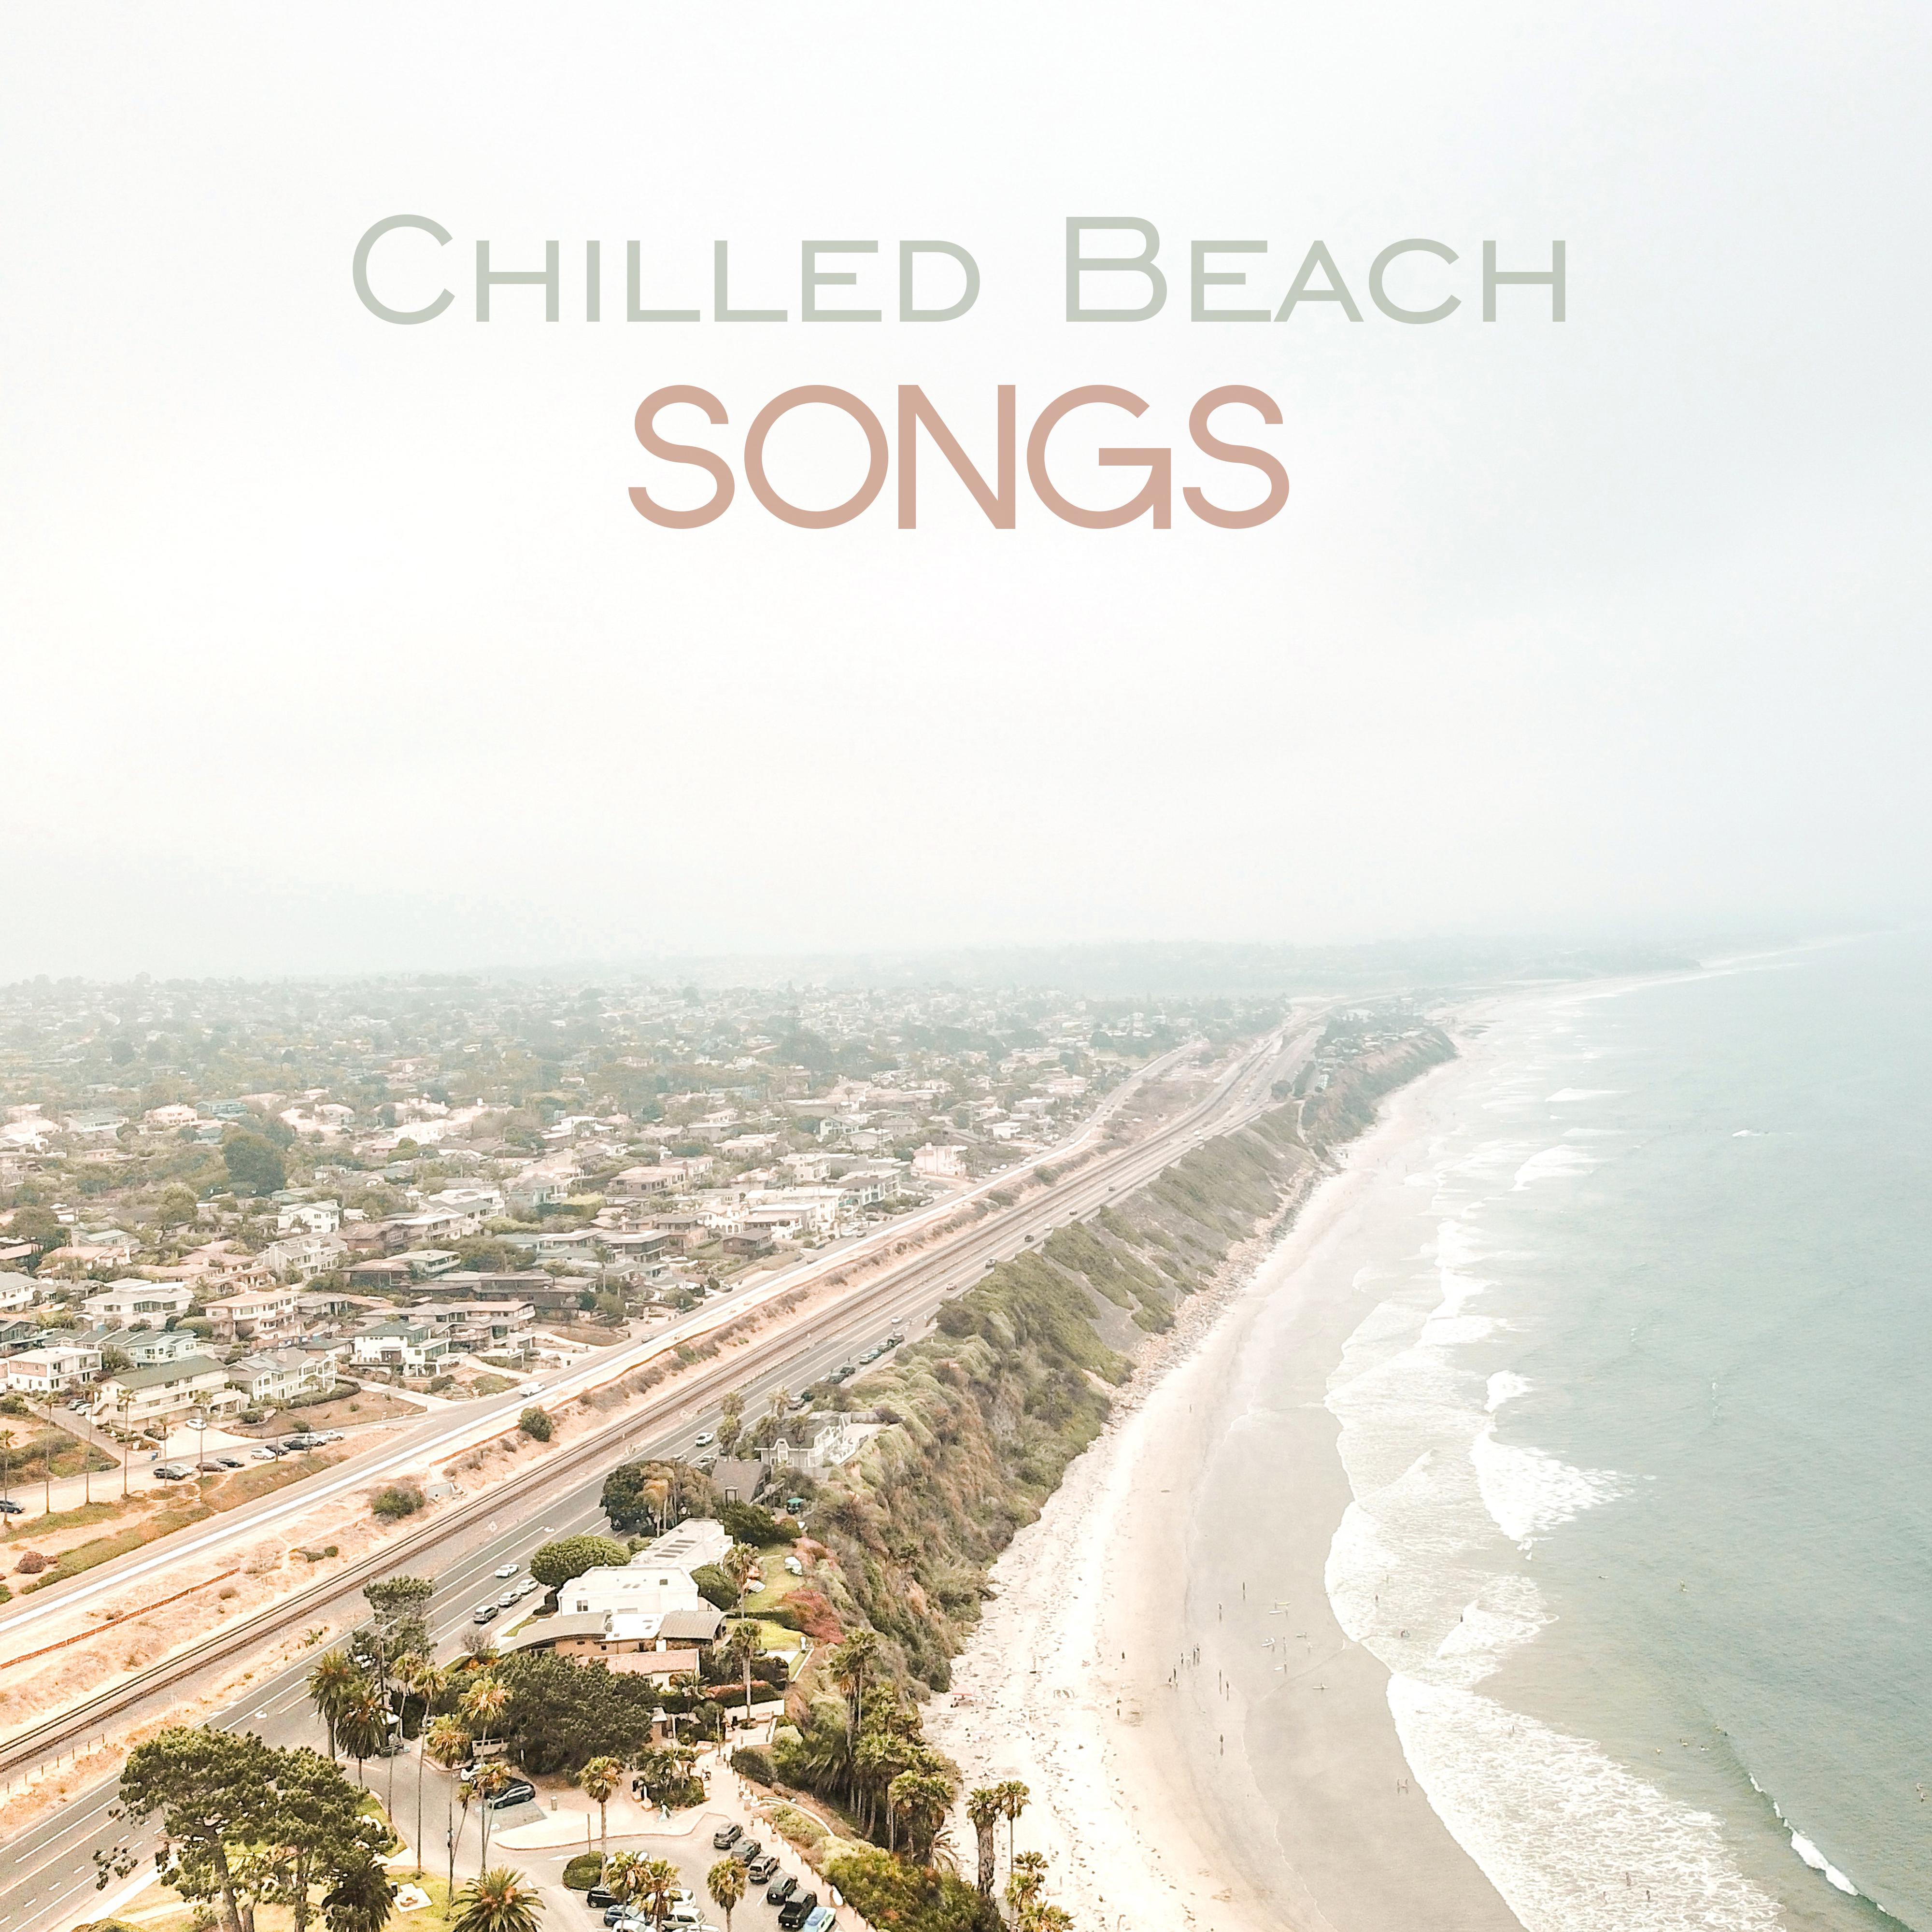 Chilled Beach Songs